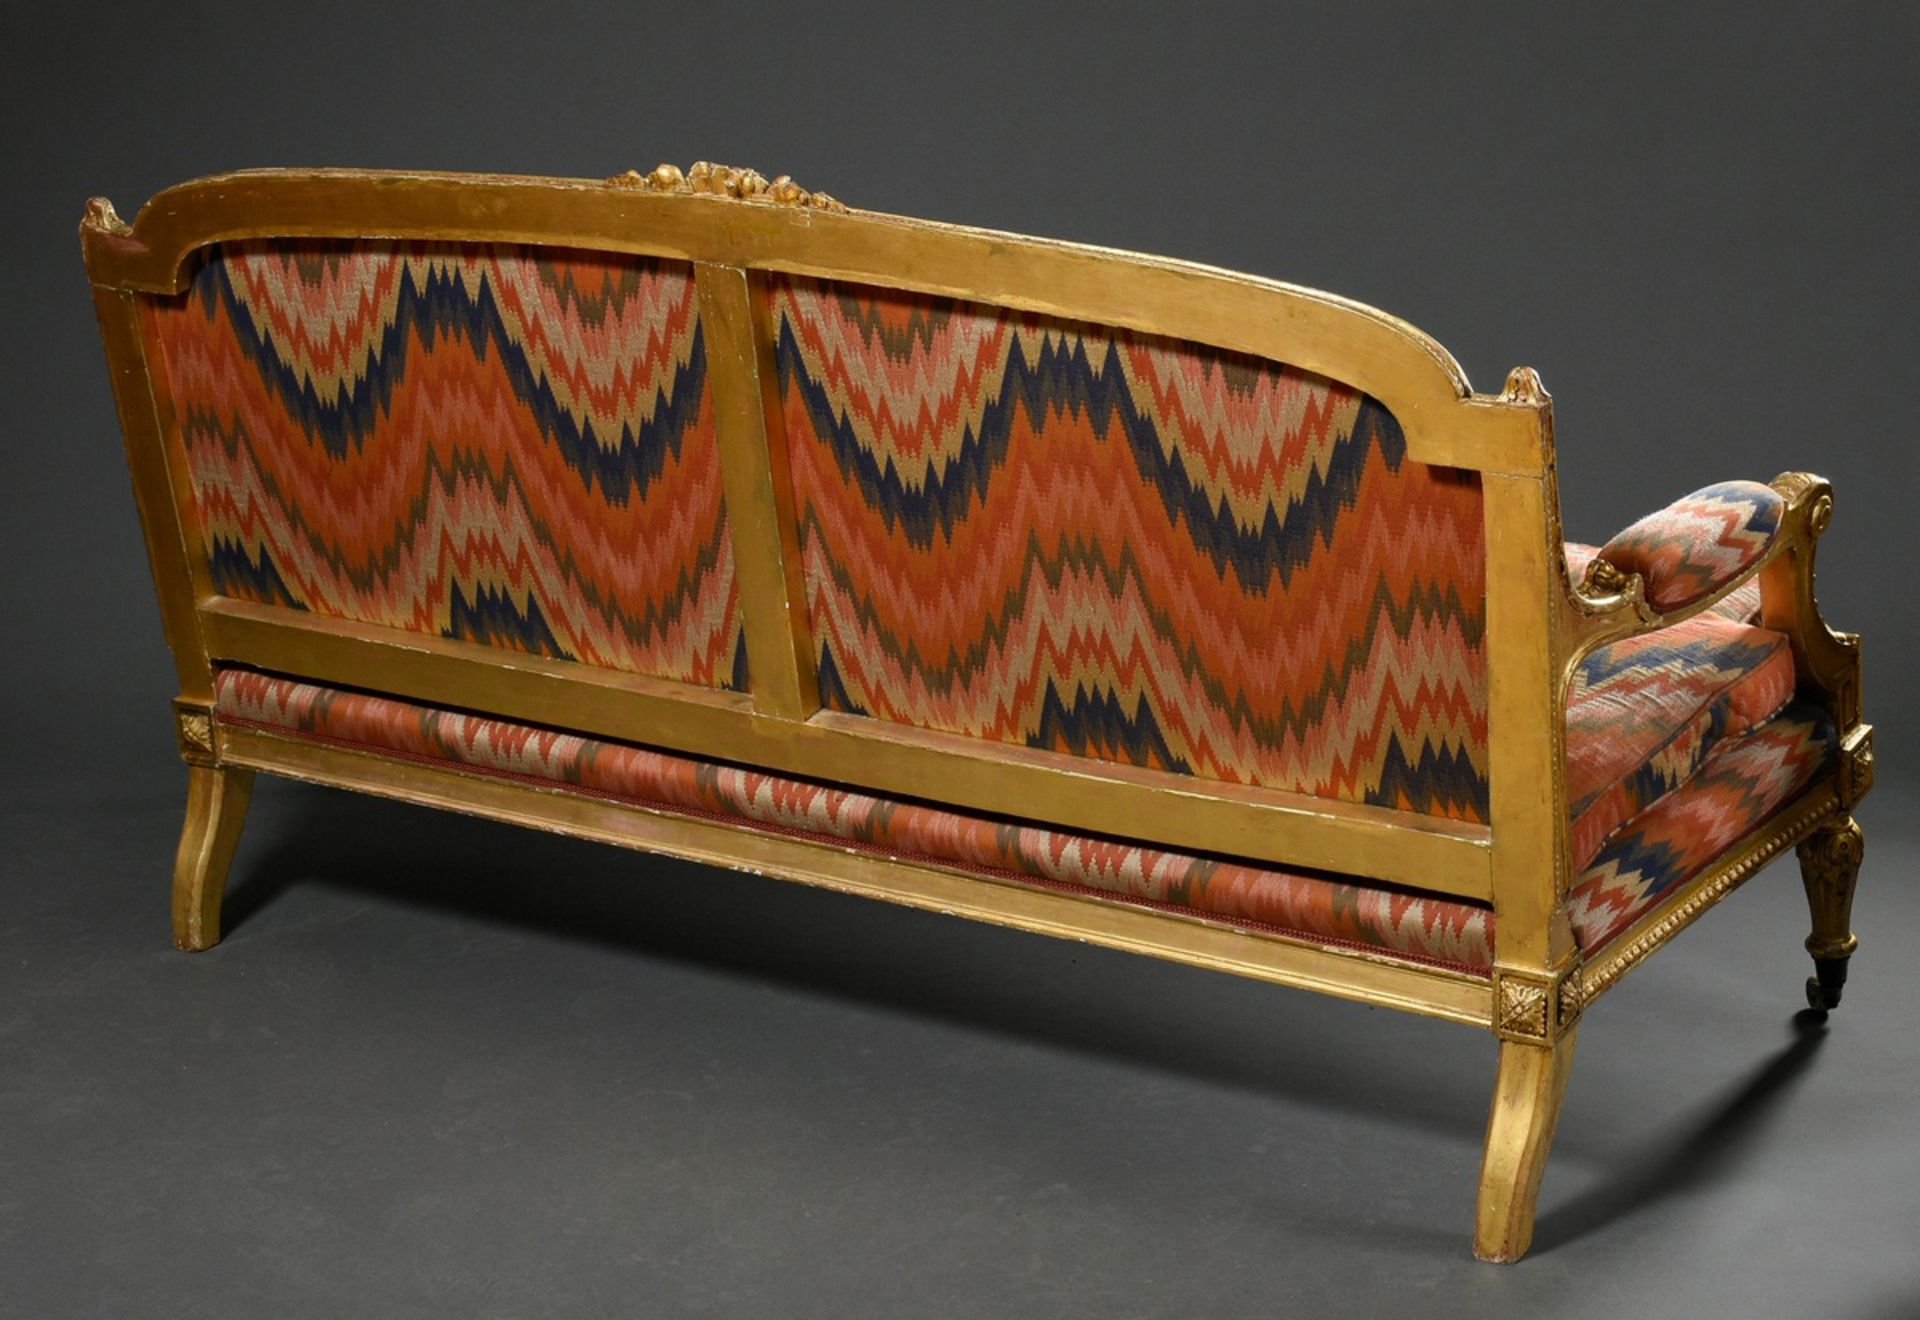 Louis XVI style sofa with leaf-gilded carved frame and opulent upholstery fabric in ikat look, arou - Image 6 of 6